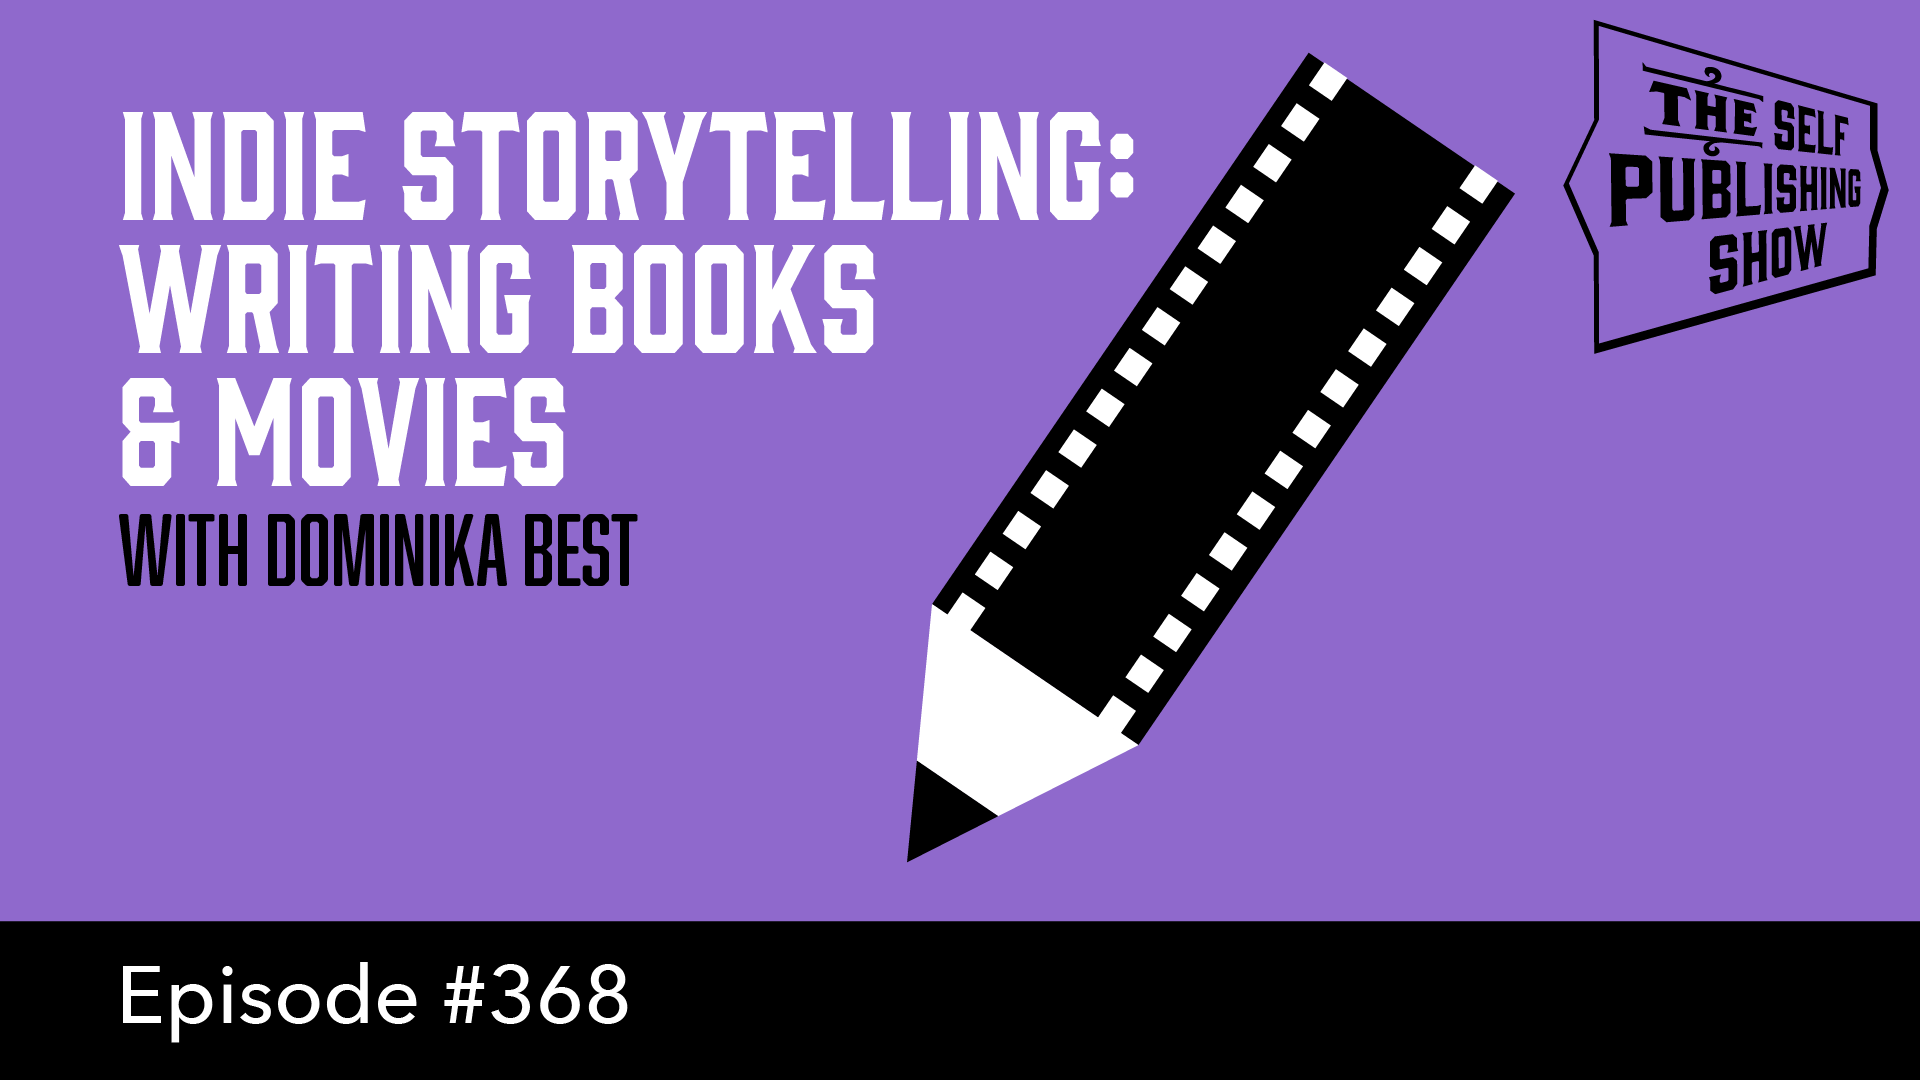 Dominika Best is a screenwriter, director and VFX artist – how does she apply these skills to writing novels?